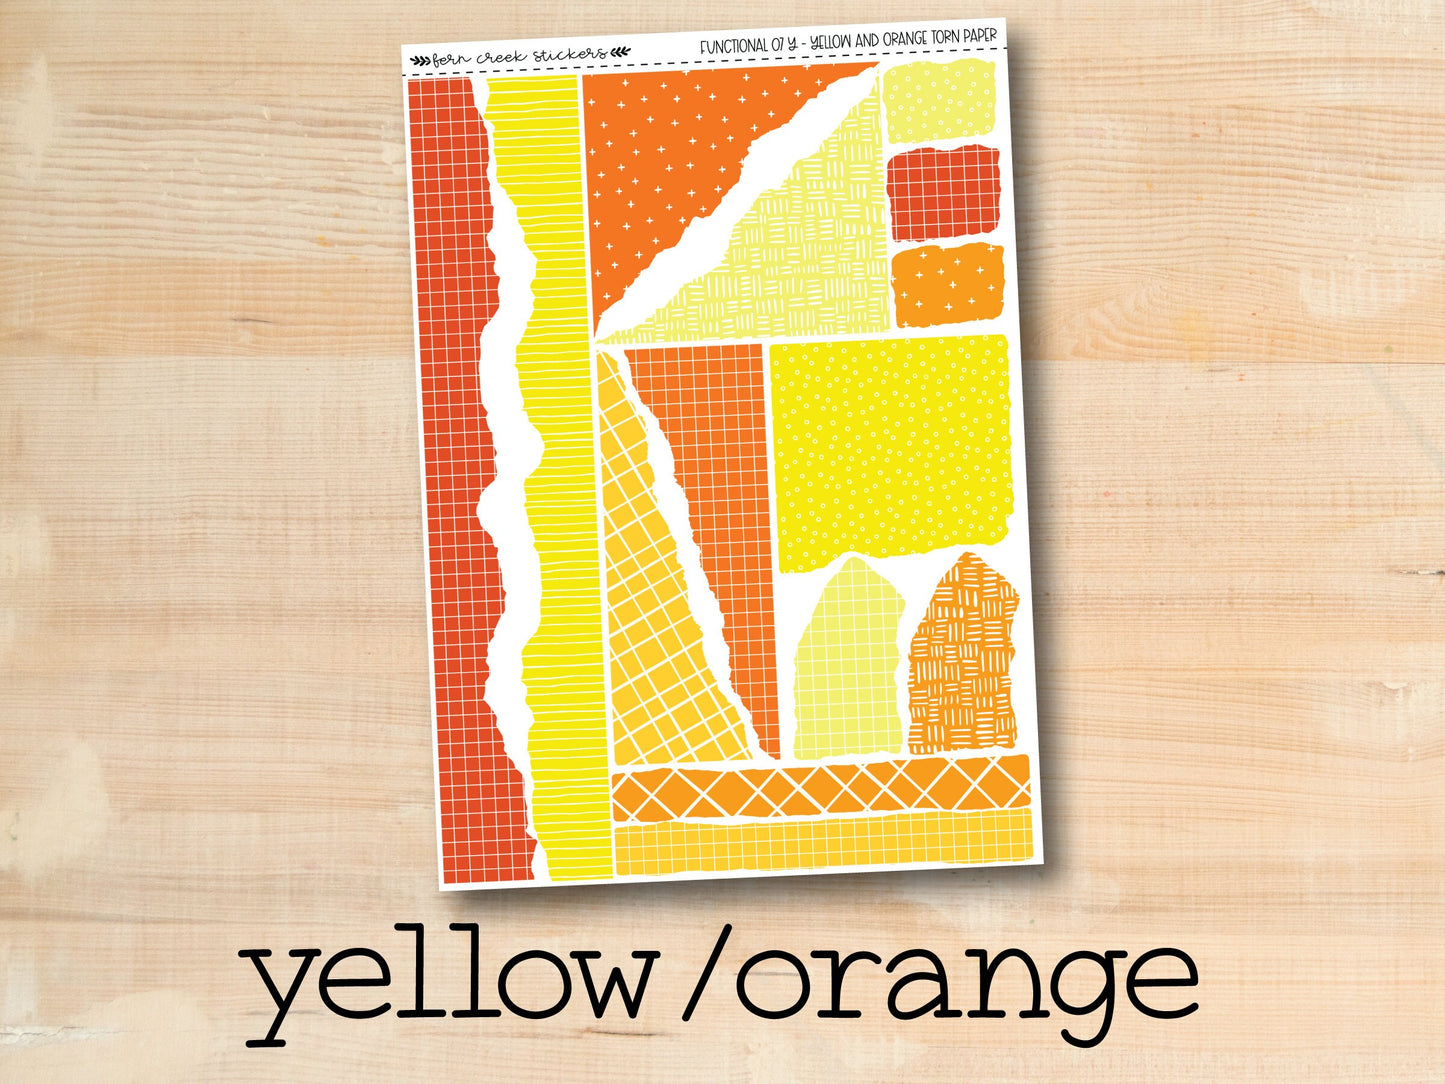 a picture of a yellow and orange map